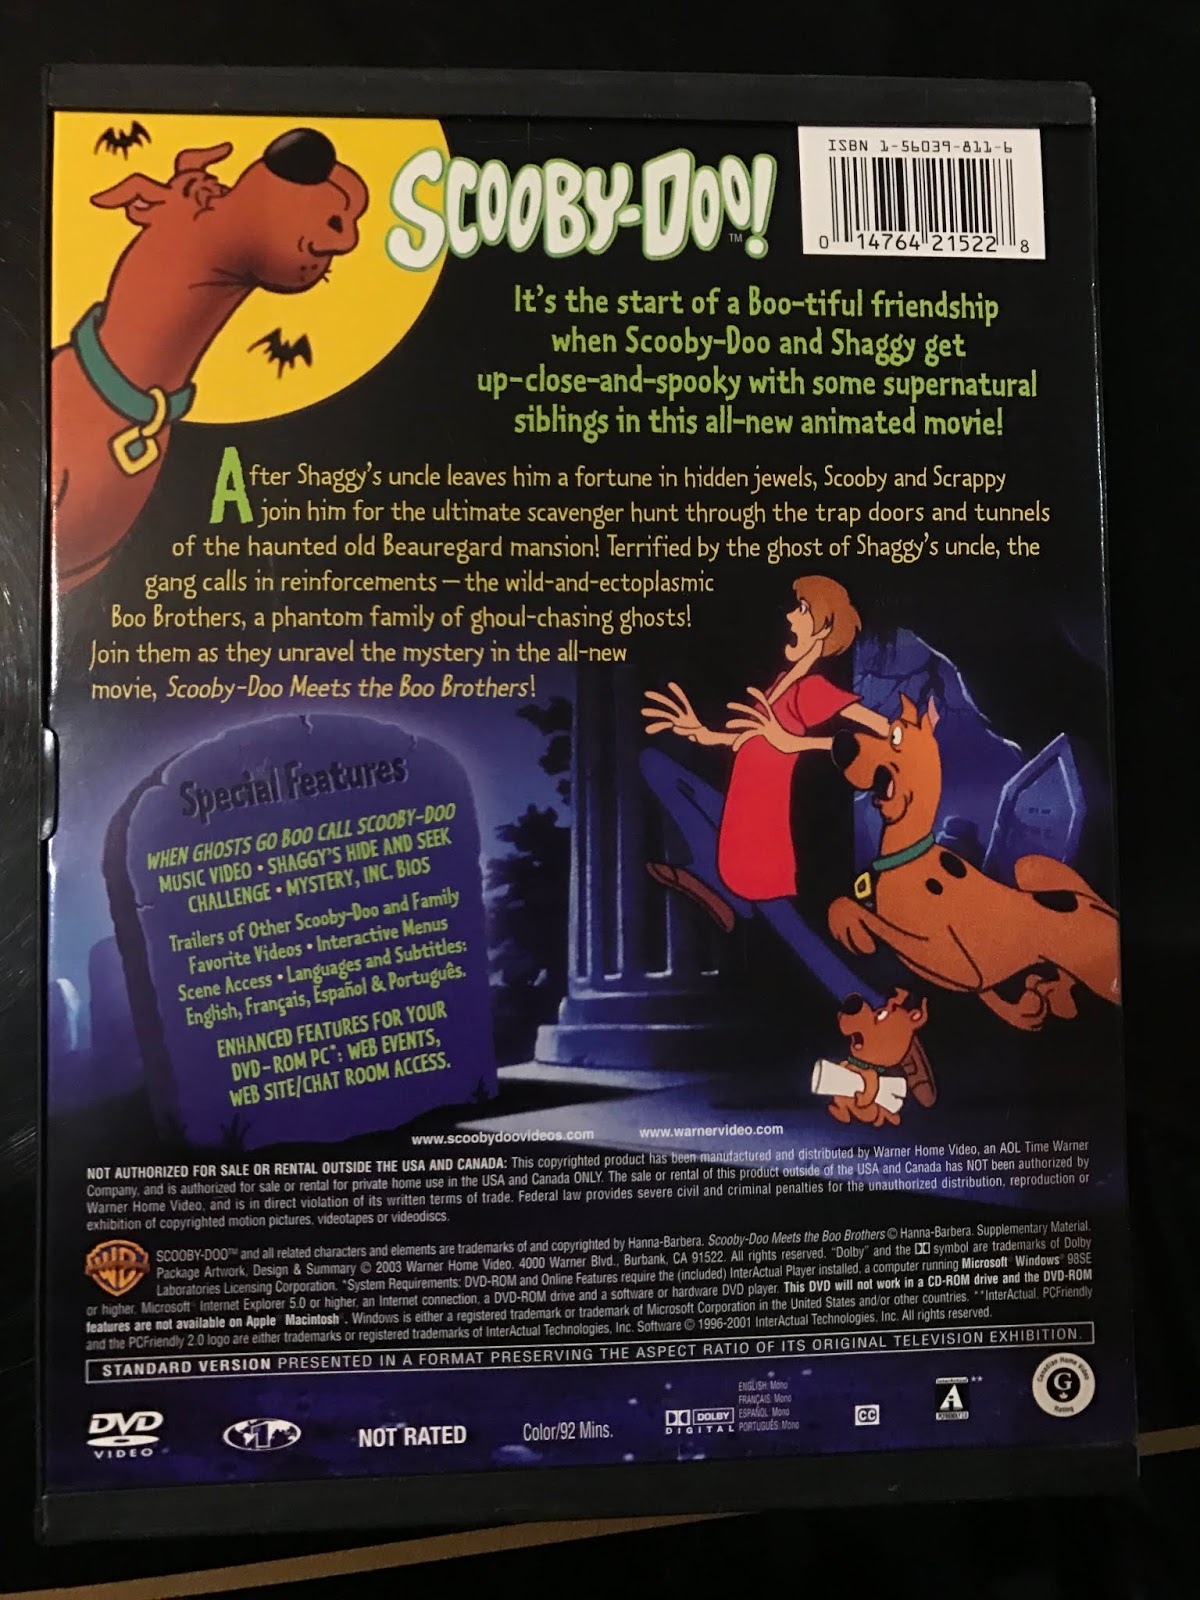 ScoobyAddict's Blog: My Scooby Stuff - Day 157 - Boo Brothers DVD